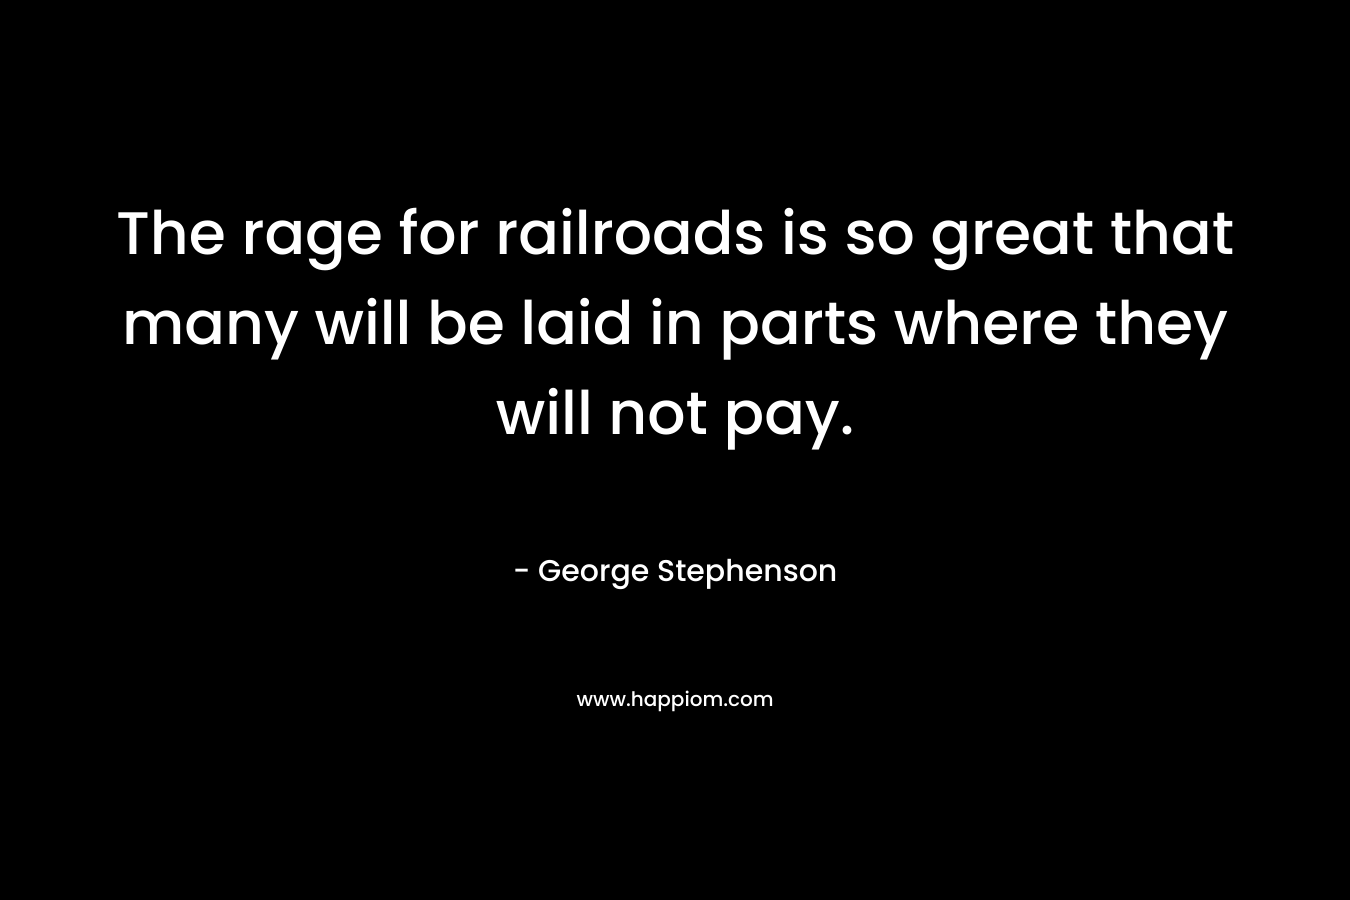 The rage for railroads is so great that many will be laid in parts where they will not pay. – George Stephenson